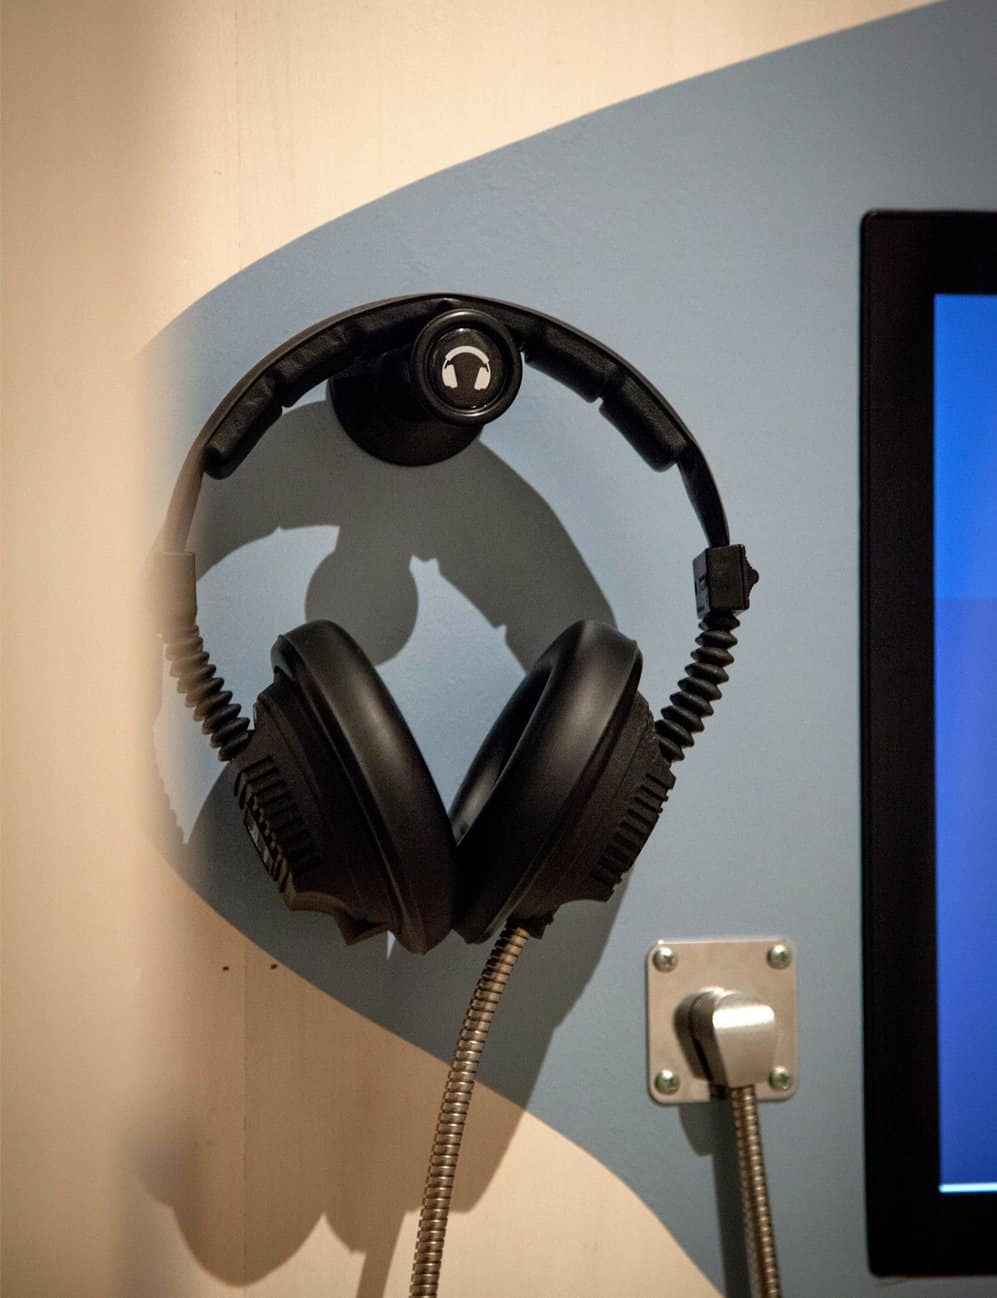 MKII Headphones installed in the National History Museum Maastricht